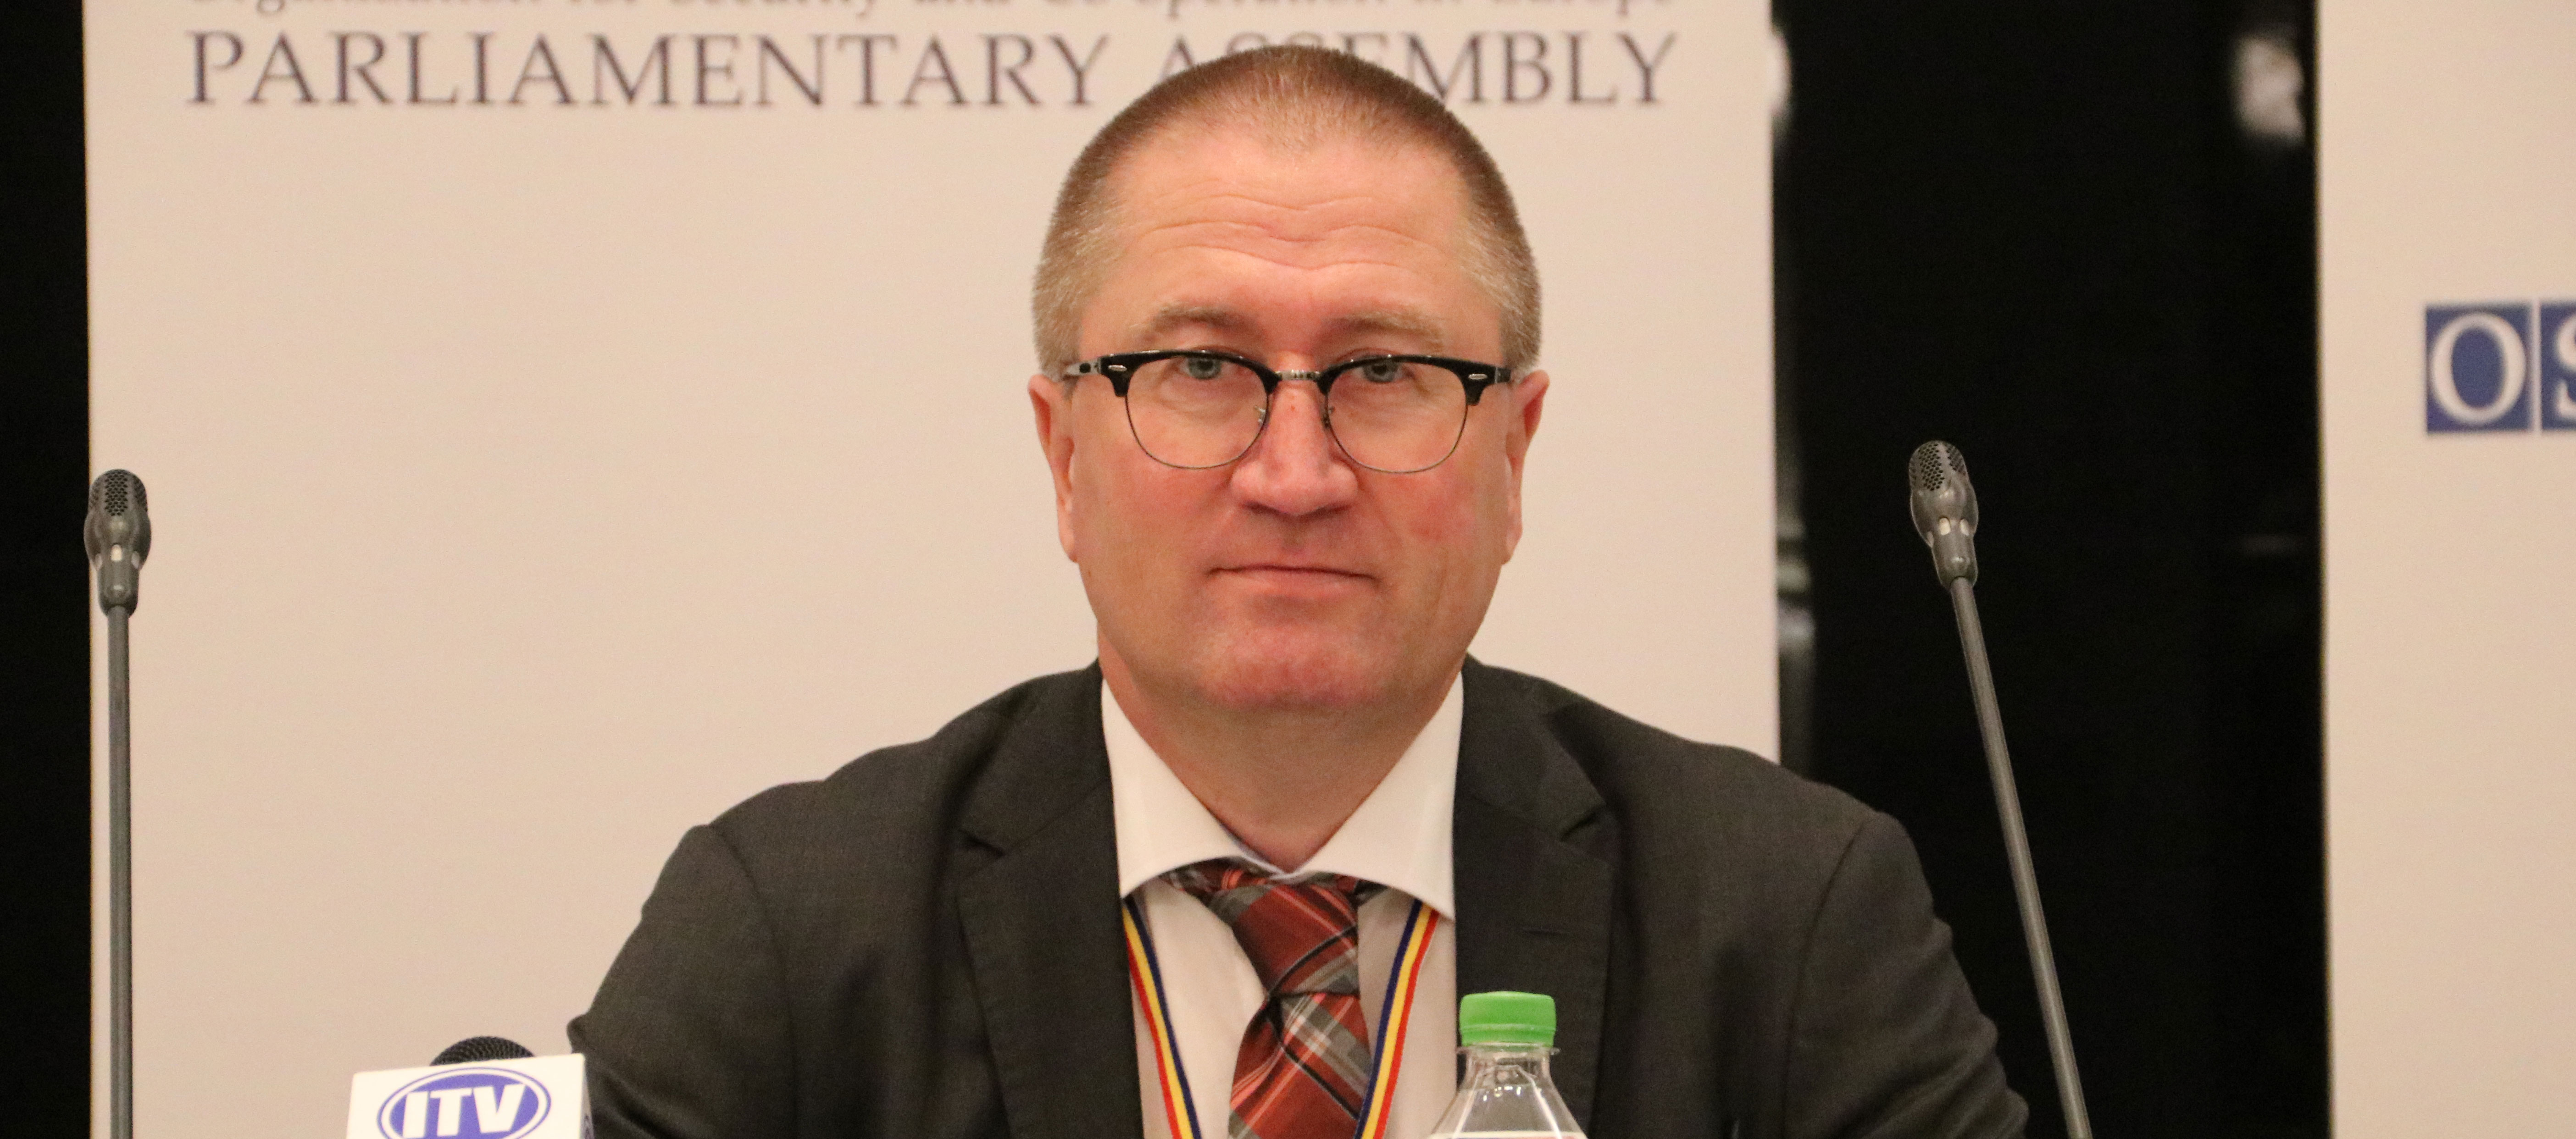 Geir Jørgen Bekkevold is head of the OSCE Parliamentary Association’s election observers during the Armenian election on 2 April 2017. Photo: OSCE PA.